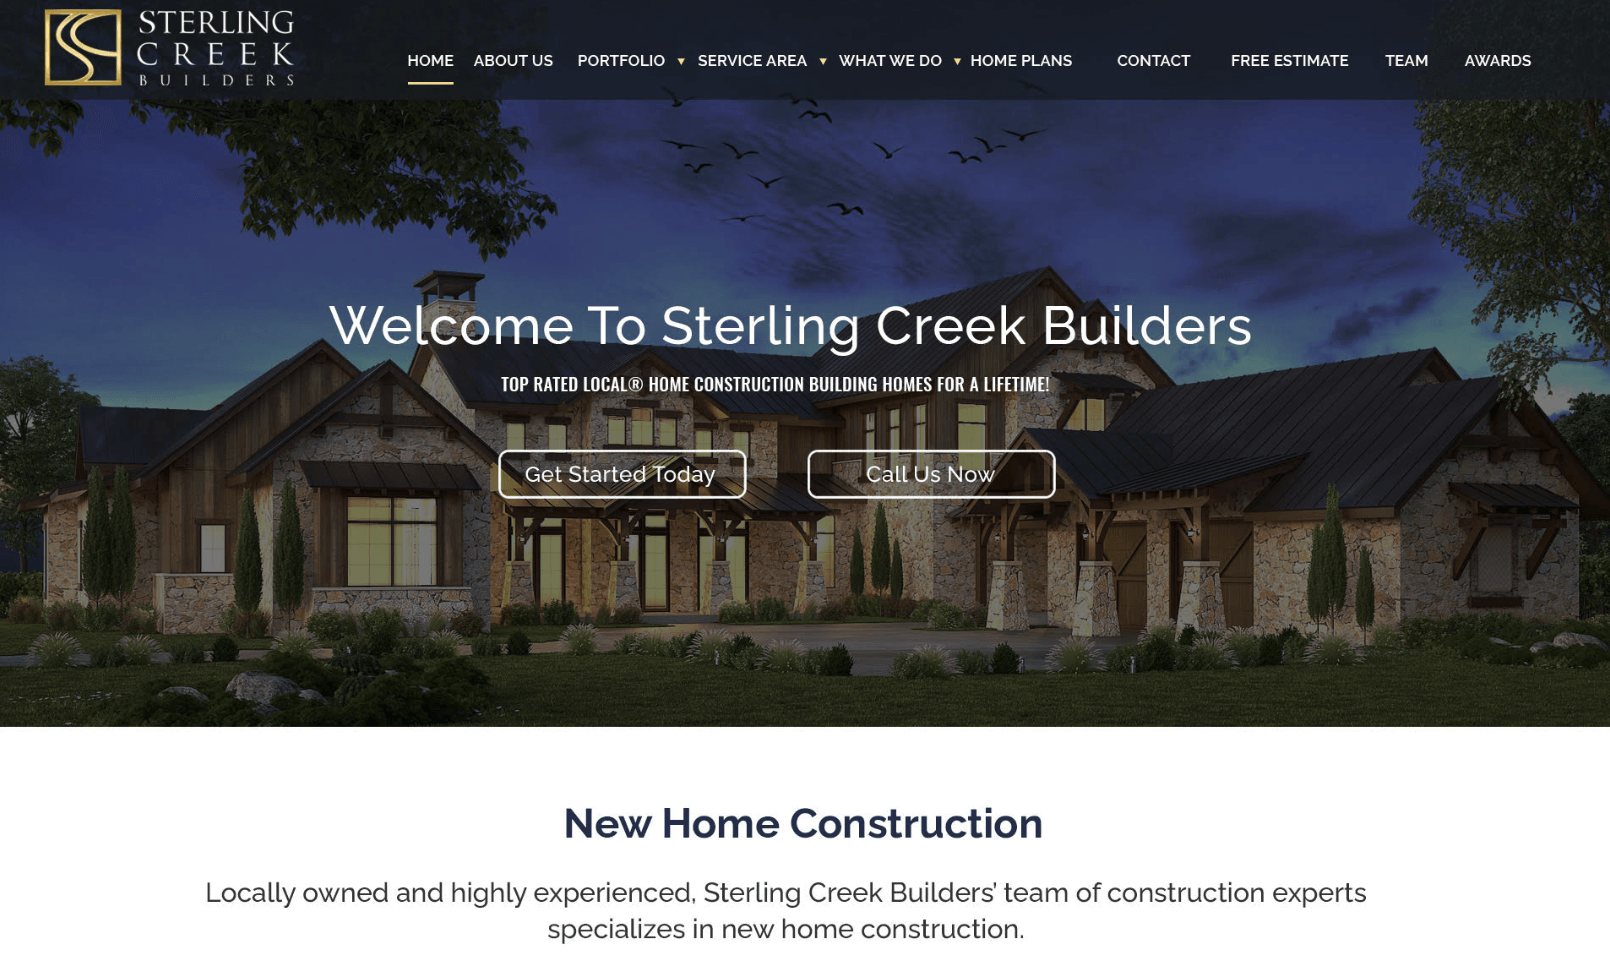 A website for sterling creek builders shows a picture of a house at night.